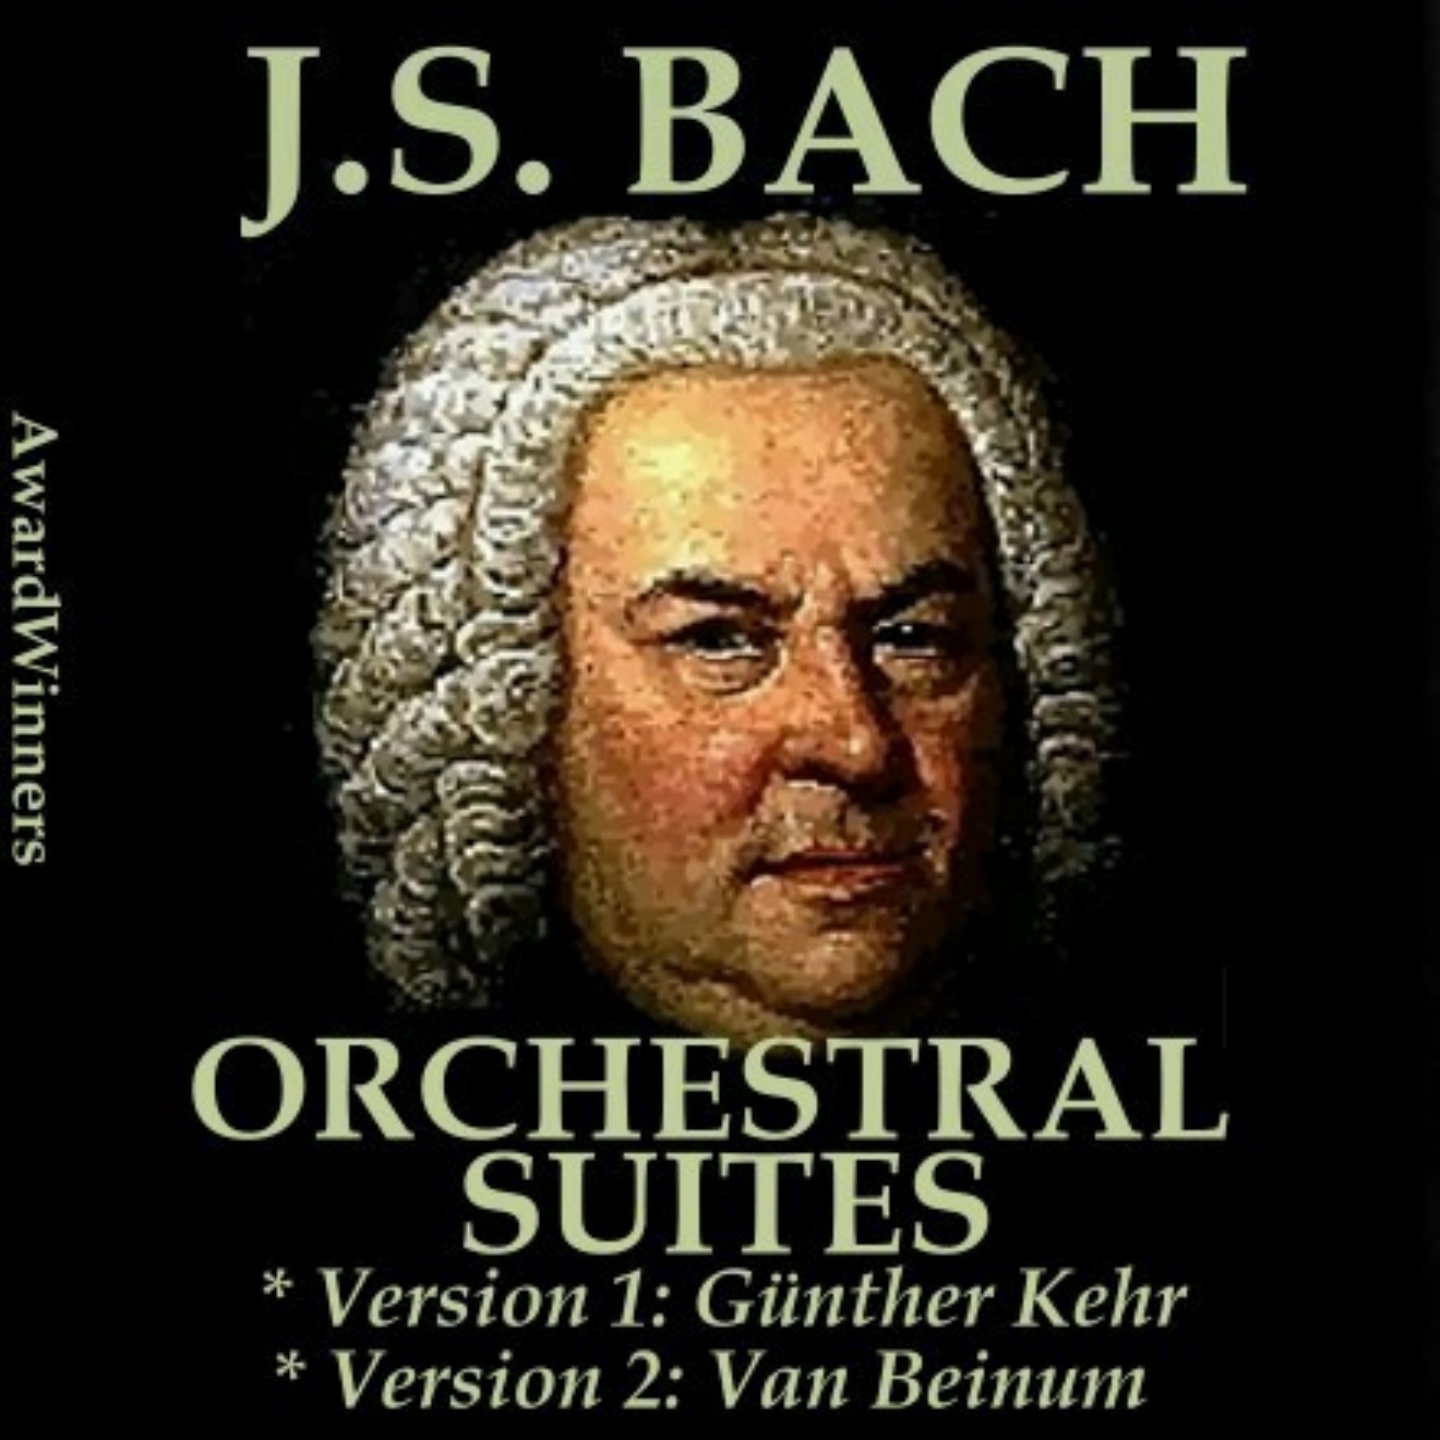 Suite - Overture No. 4 for Orchestra in D Major, BWV1069: III. Gavotte